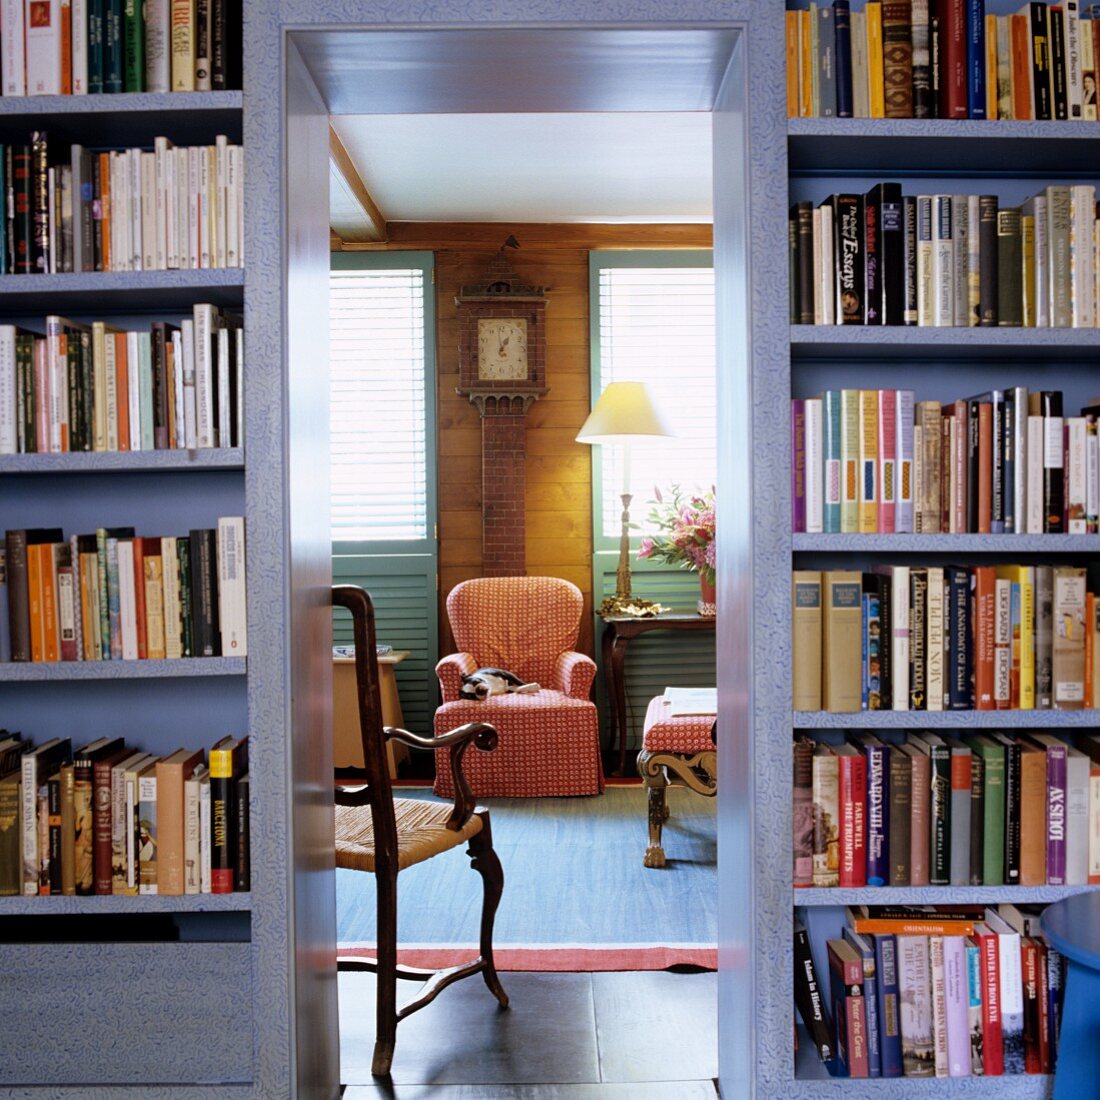 Open doorway in bookcase showing view of country-style armchair